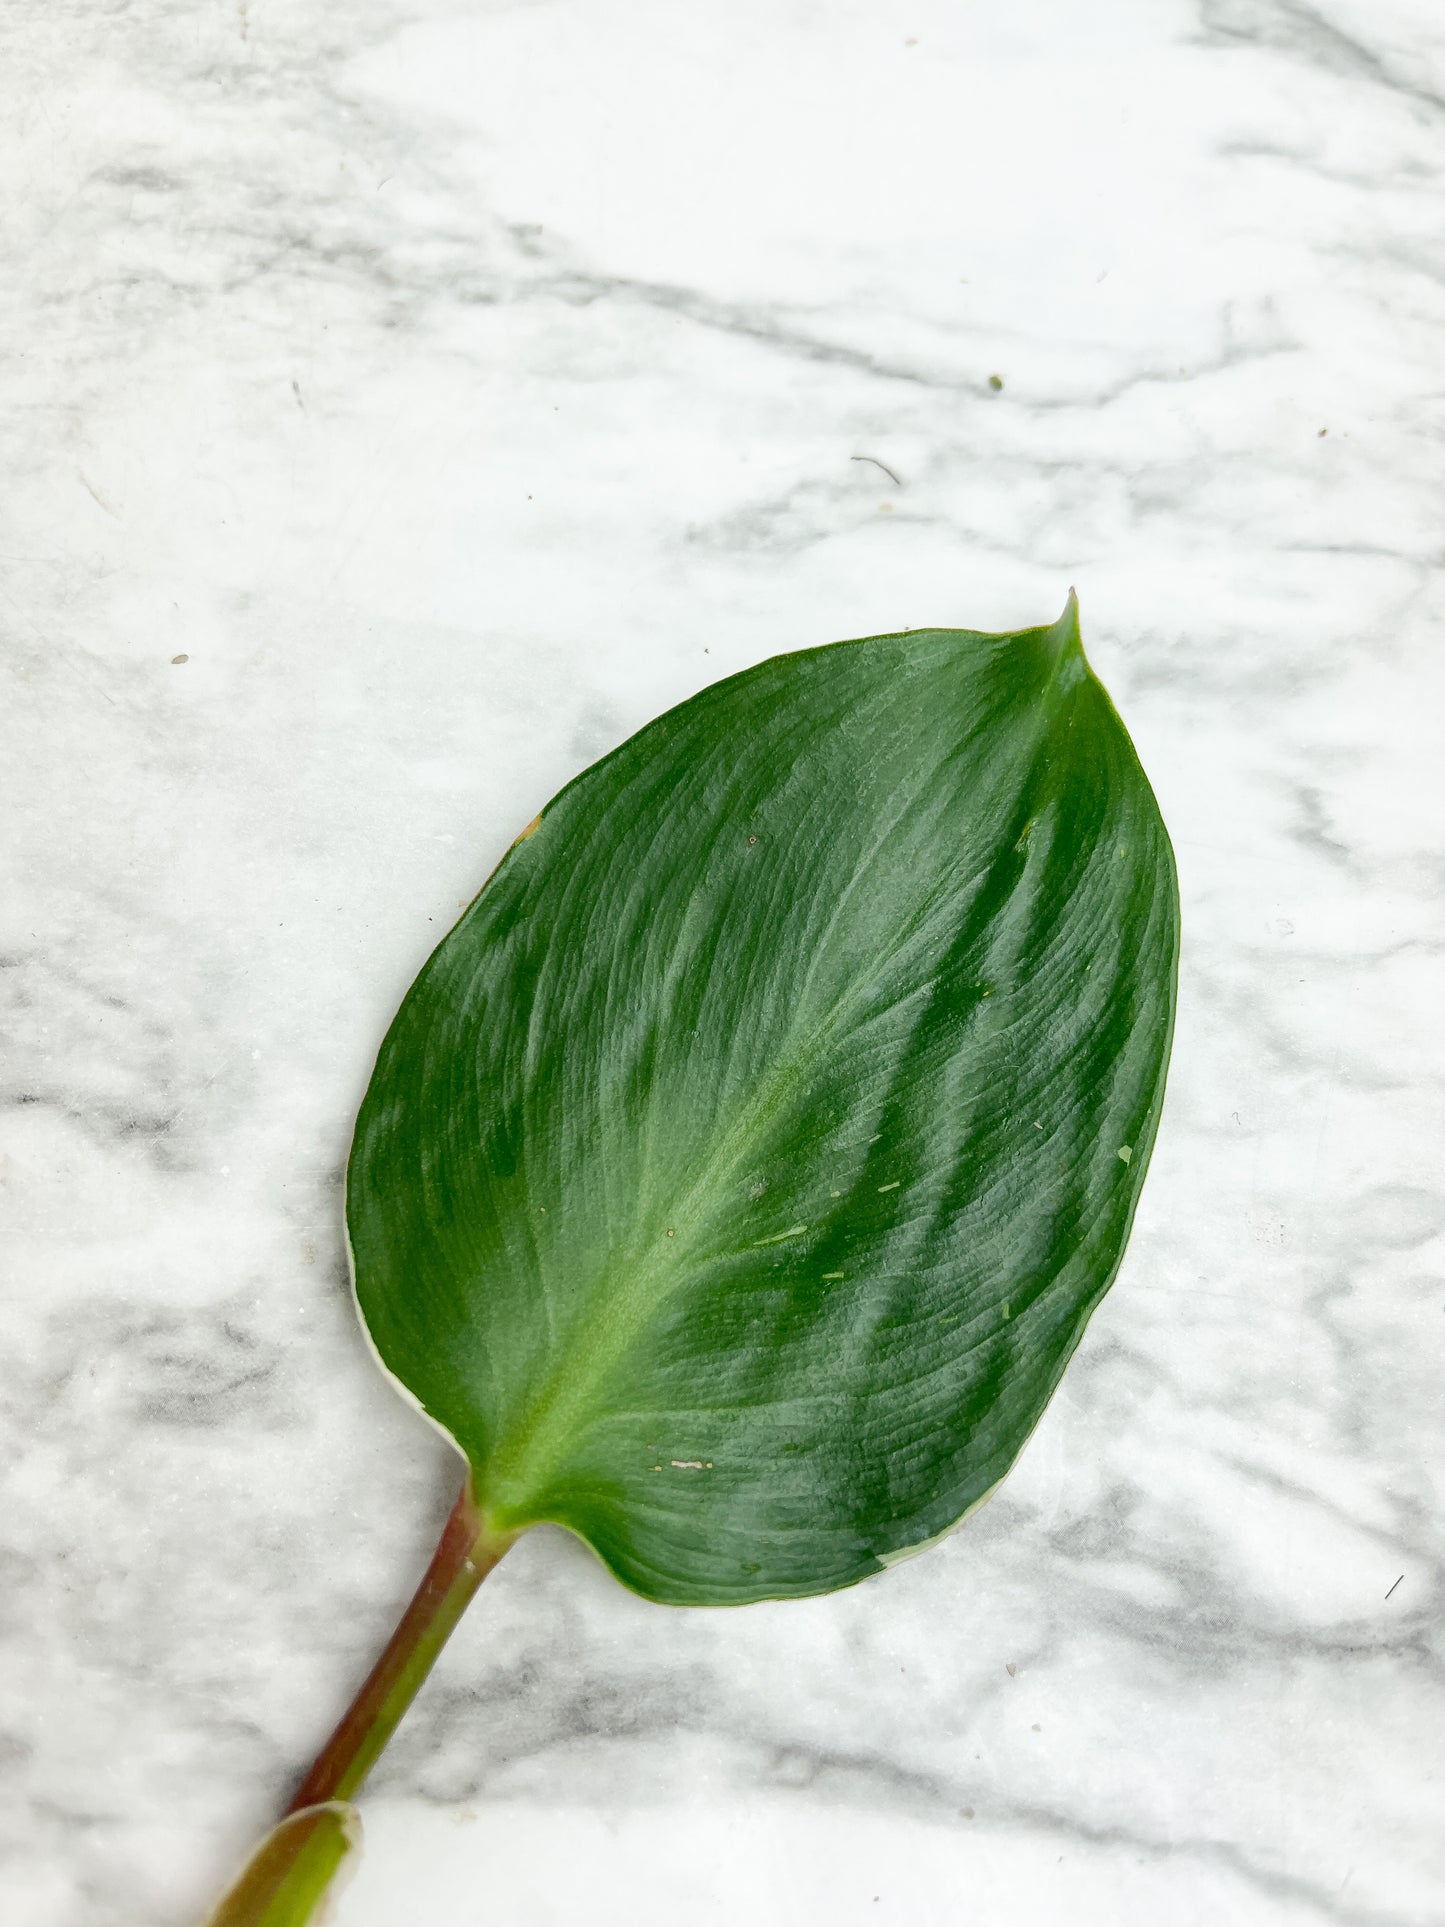 Philodendron White Knight Unrooted Cutting  (First photo is the mother plant, which is not included in this sale)